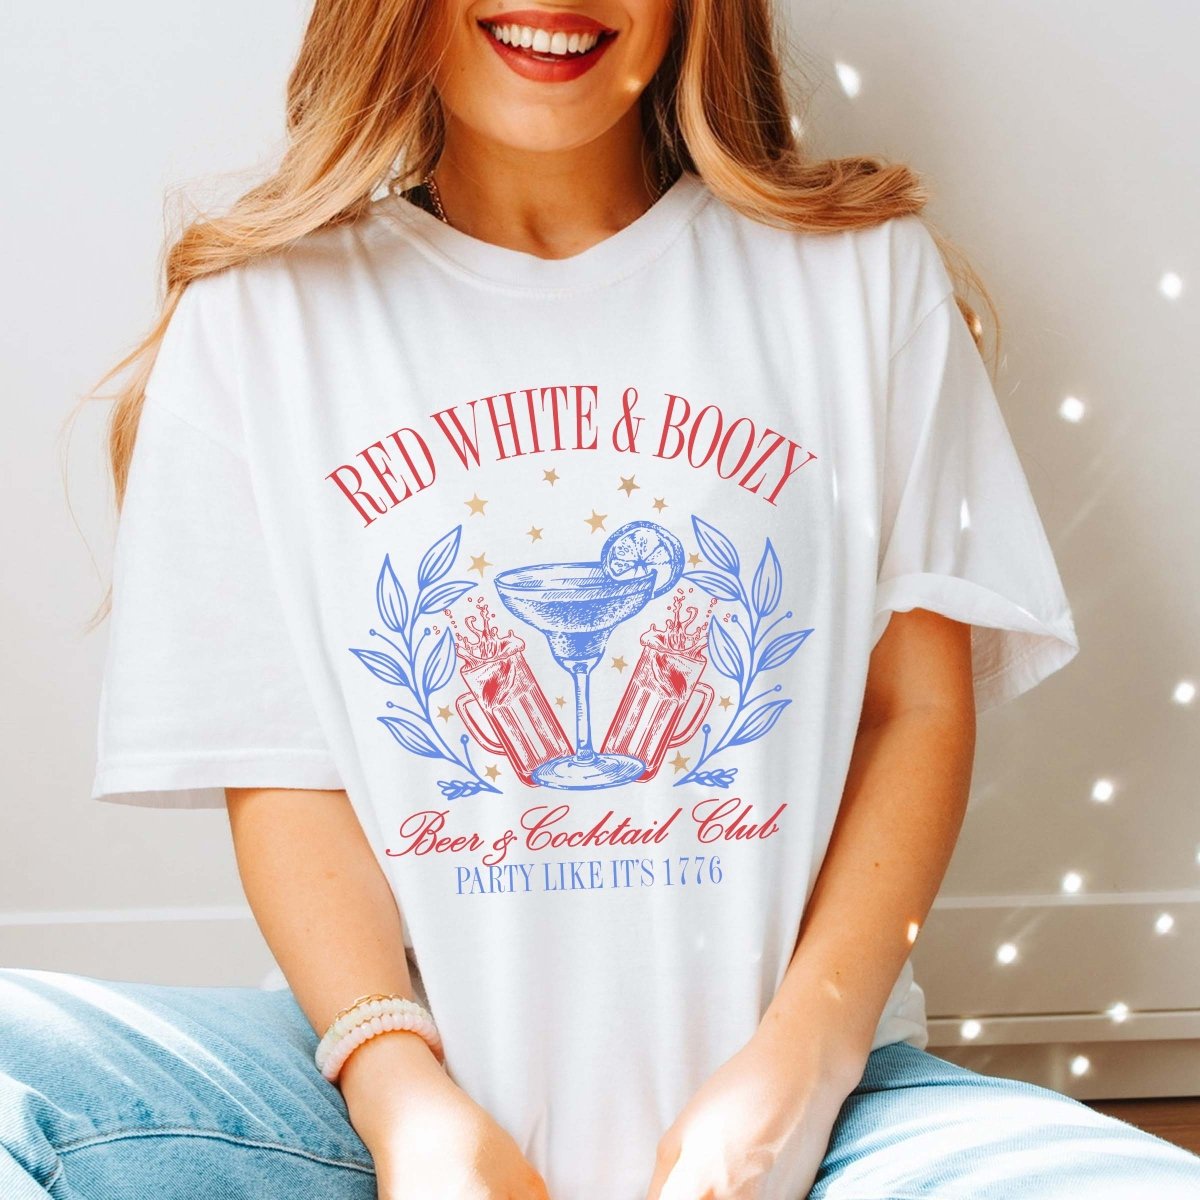 Red White & Boozy Cocktail Club Comfort Color Tee - Limeberry Designs